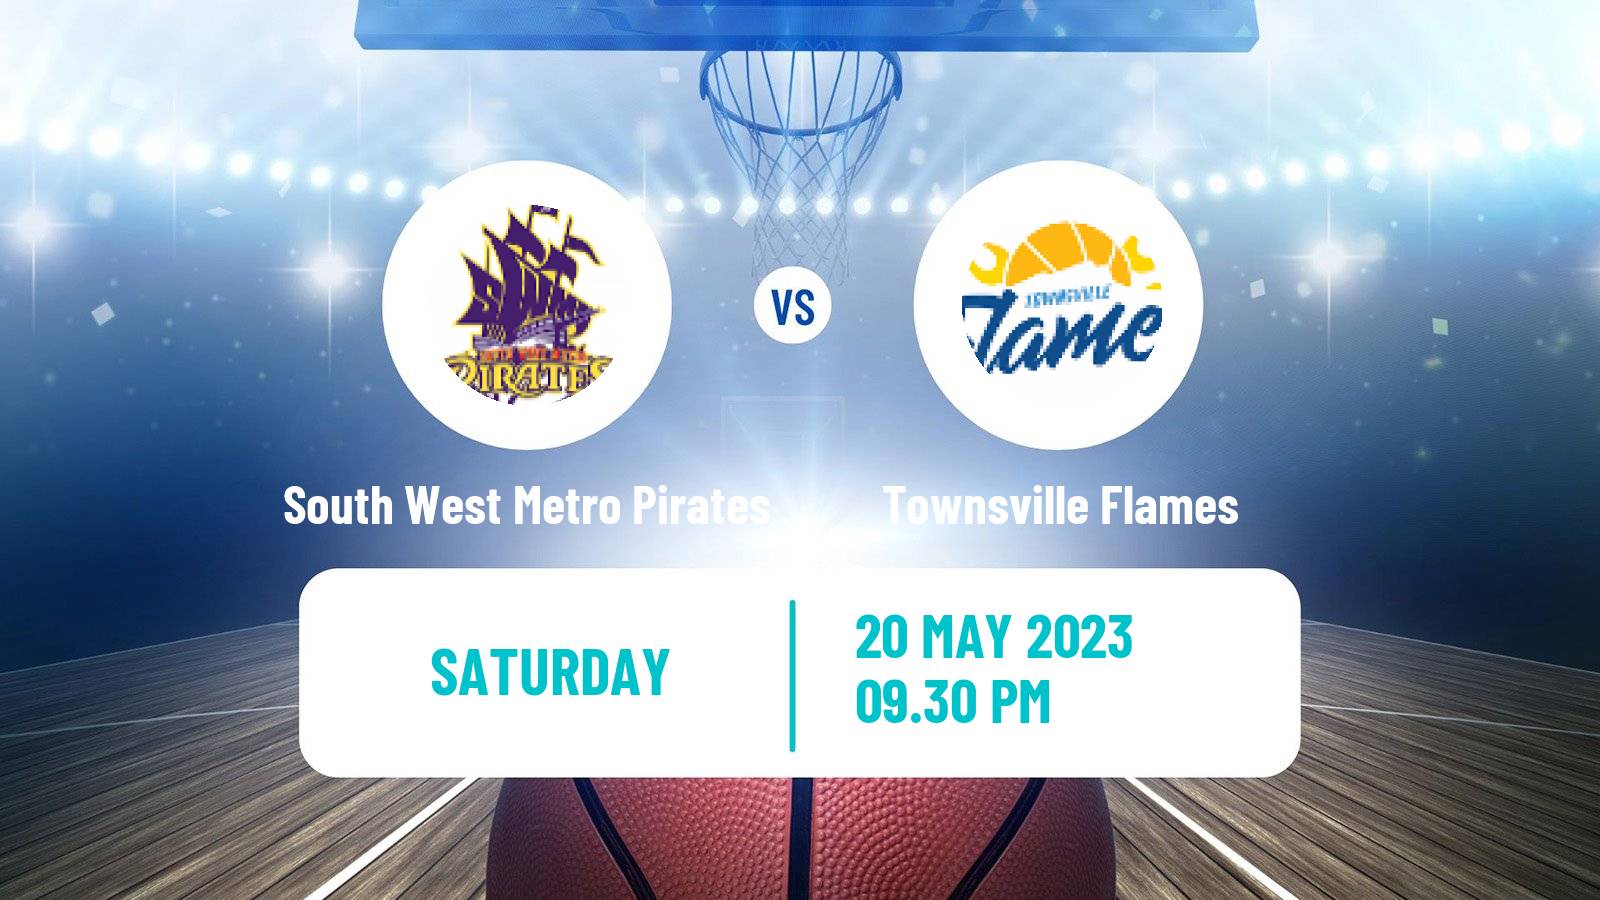 Basketball Australian NBL1 North Women South West Metro Pirates - Townsville Flames